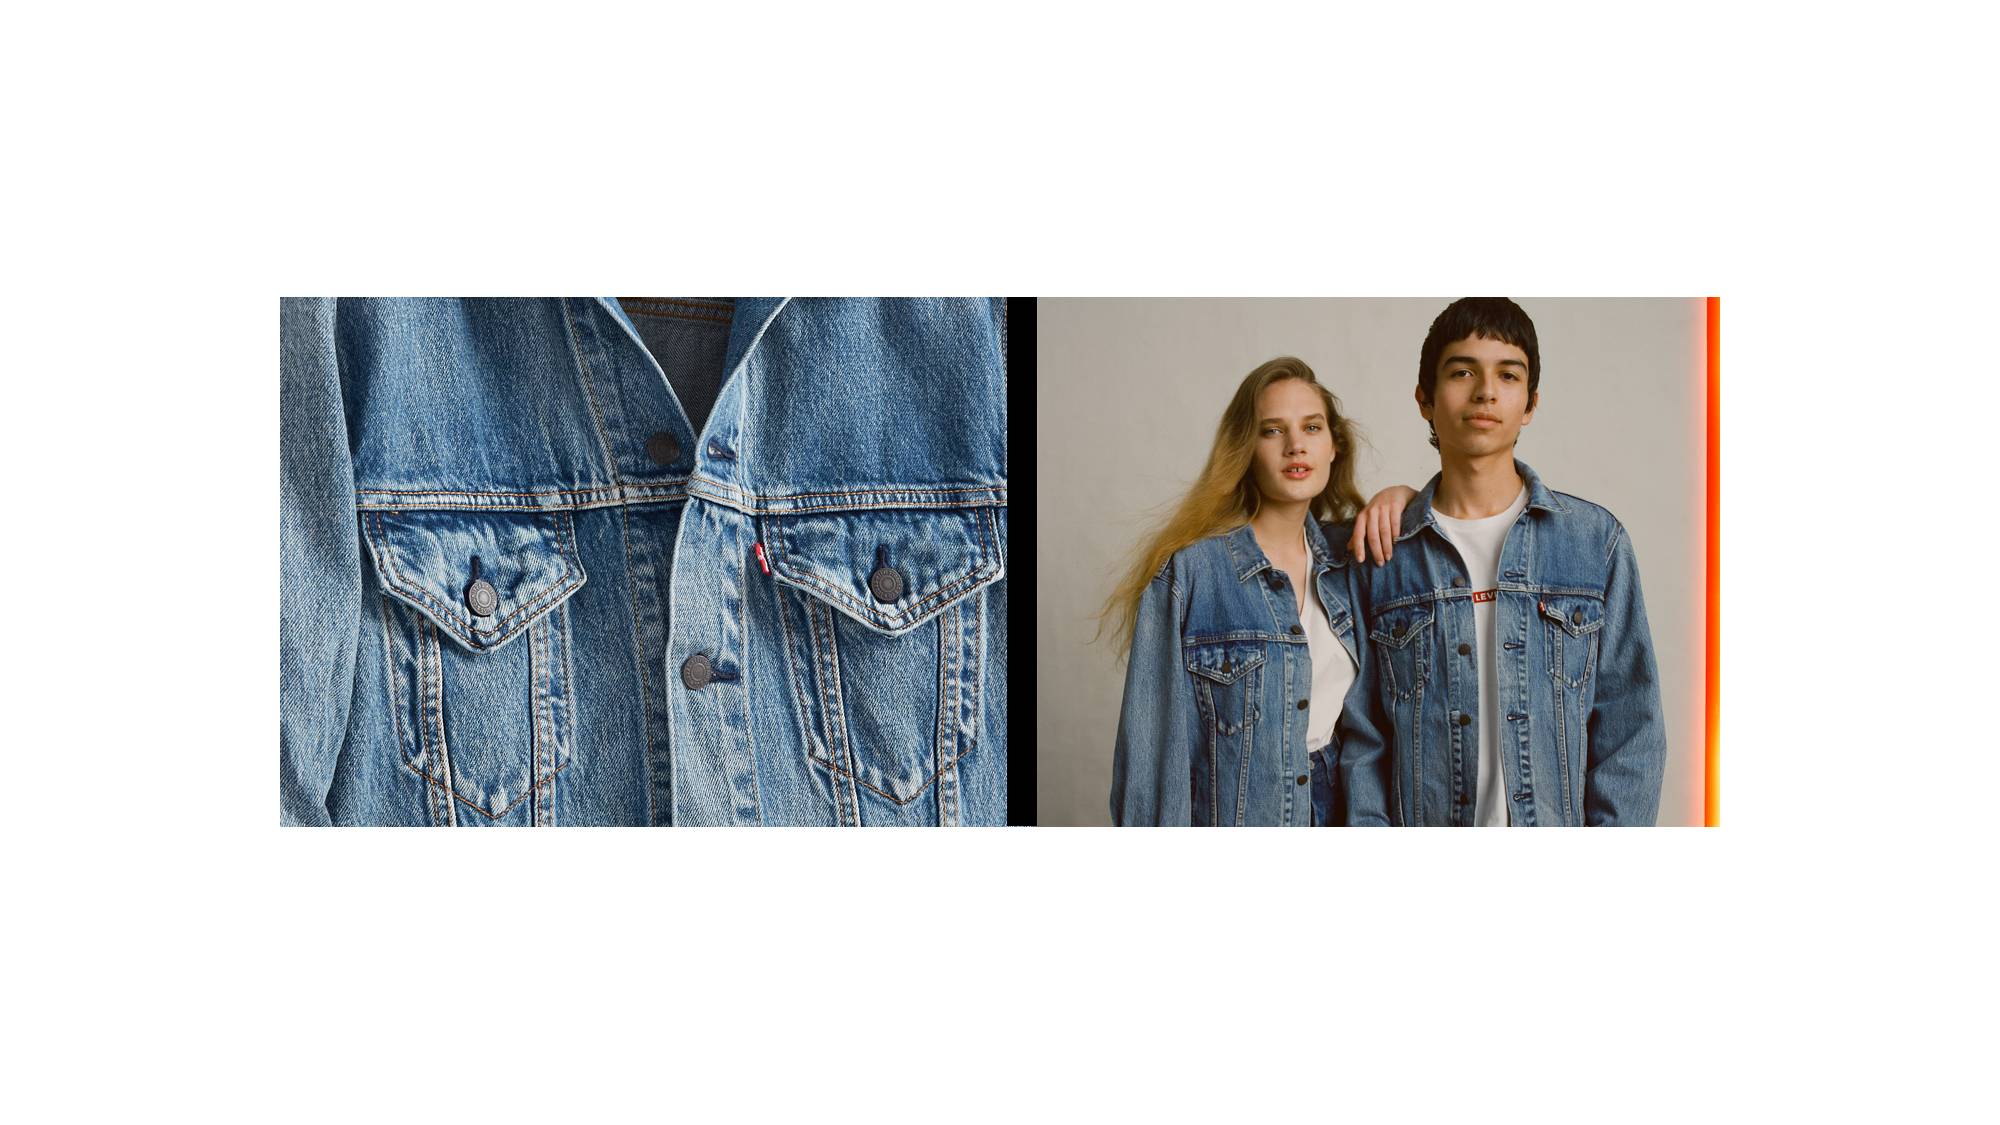 How to Date and Value Vintage Levi's Type I, II, and III Denim Jackets